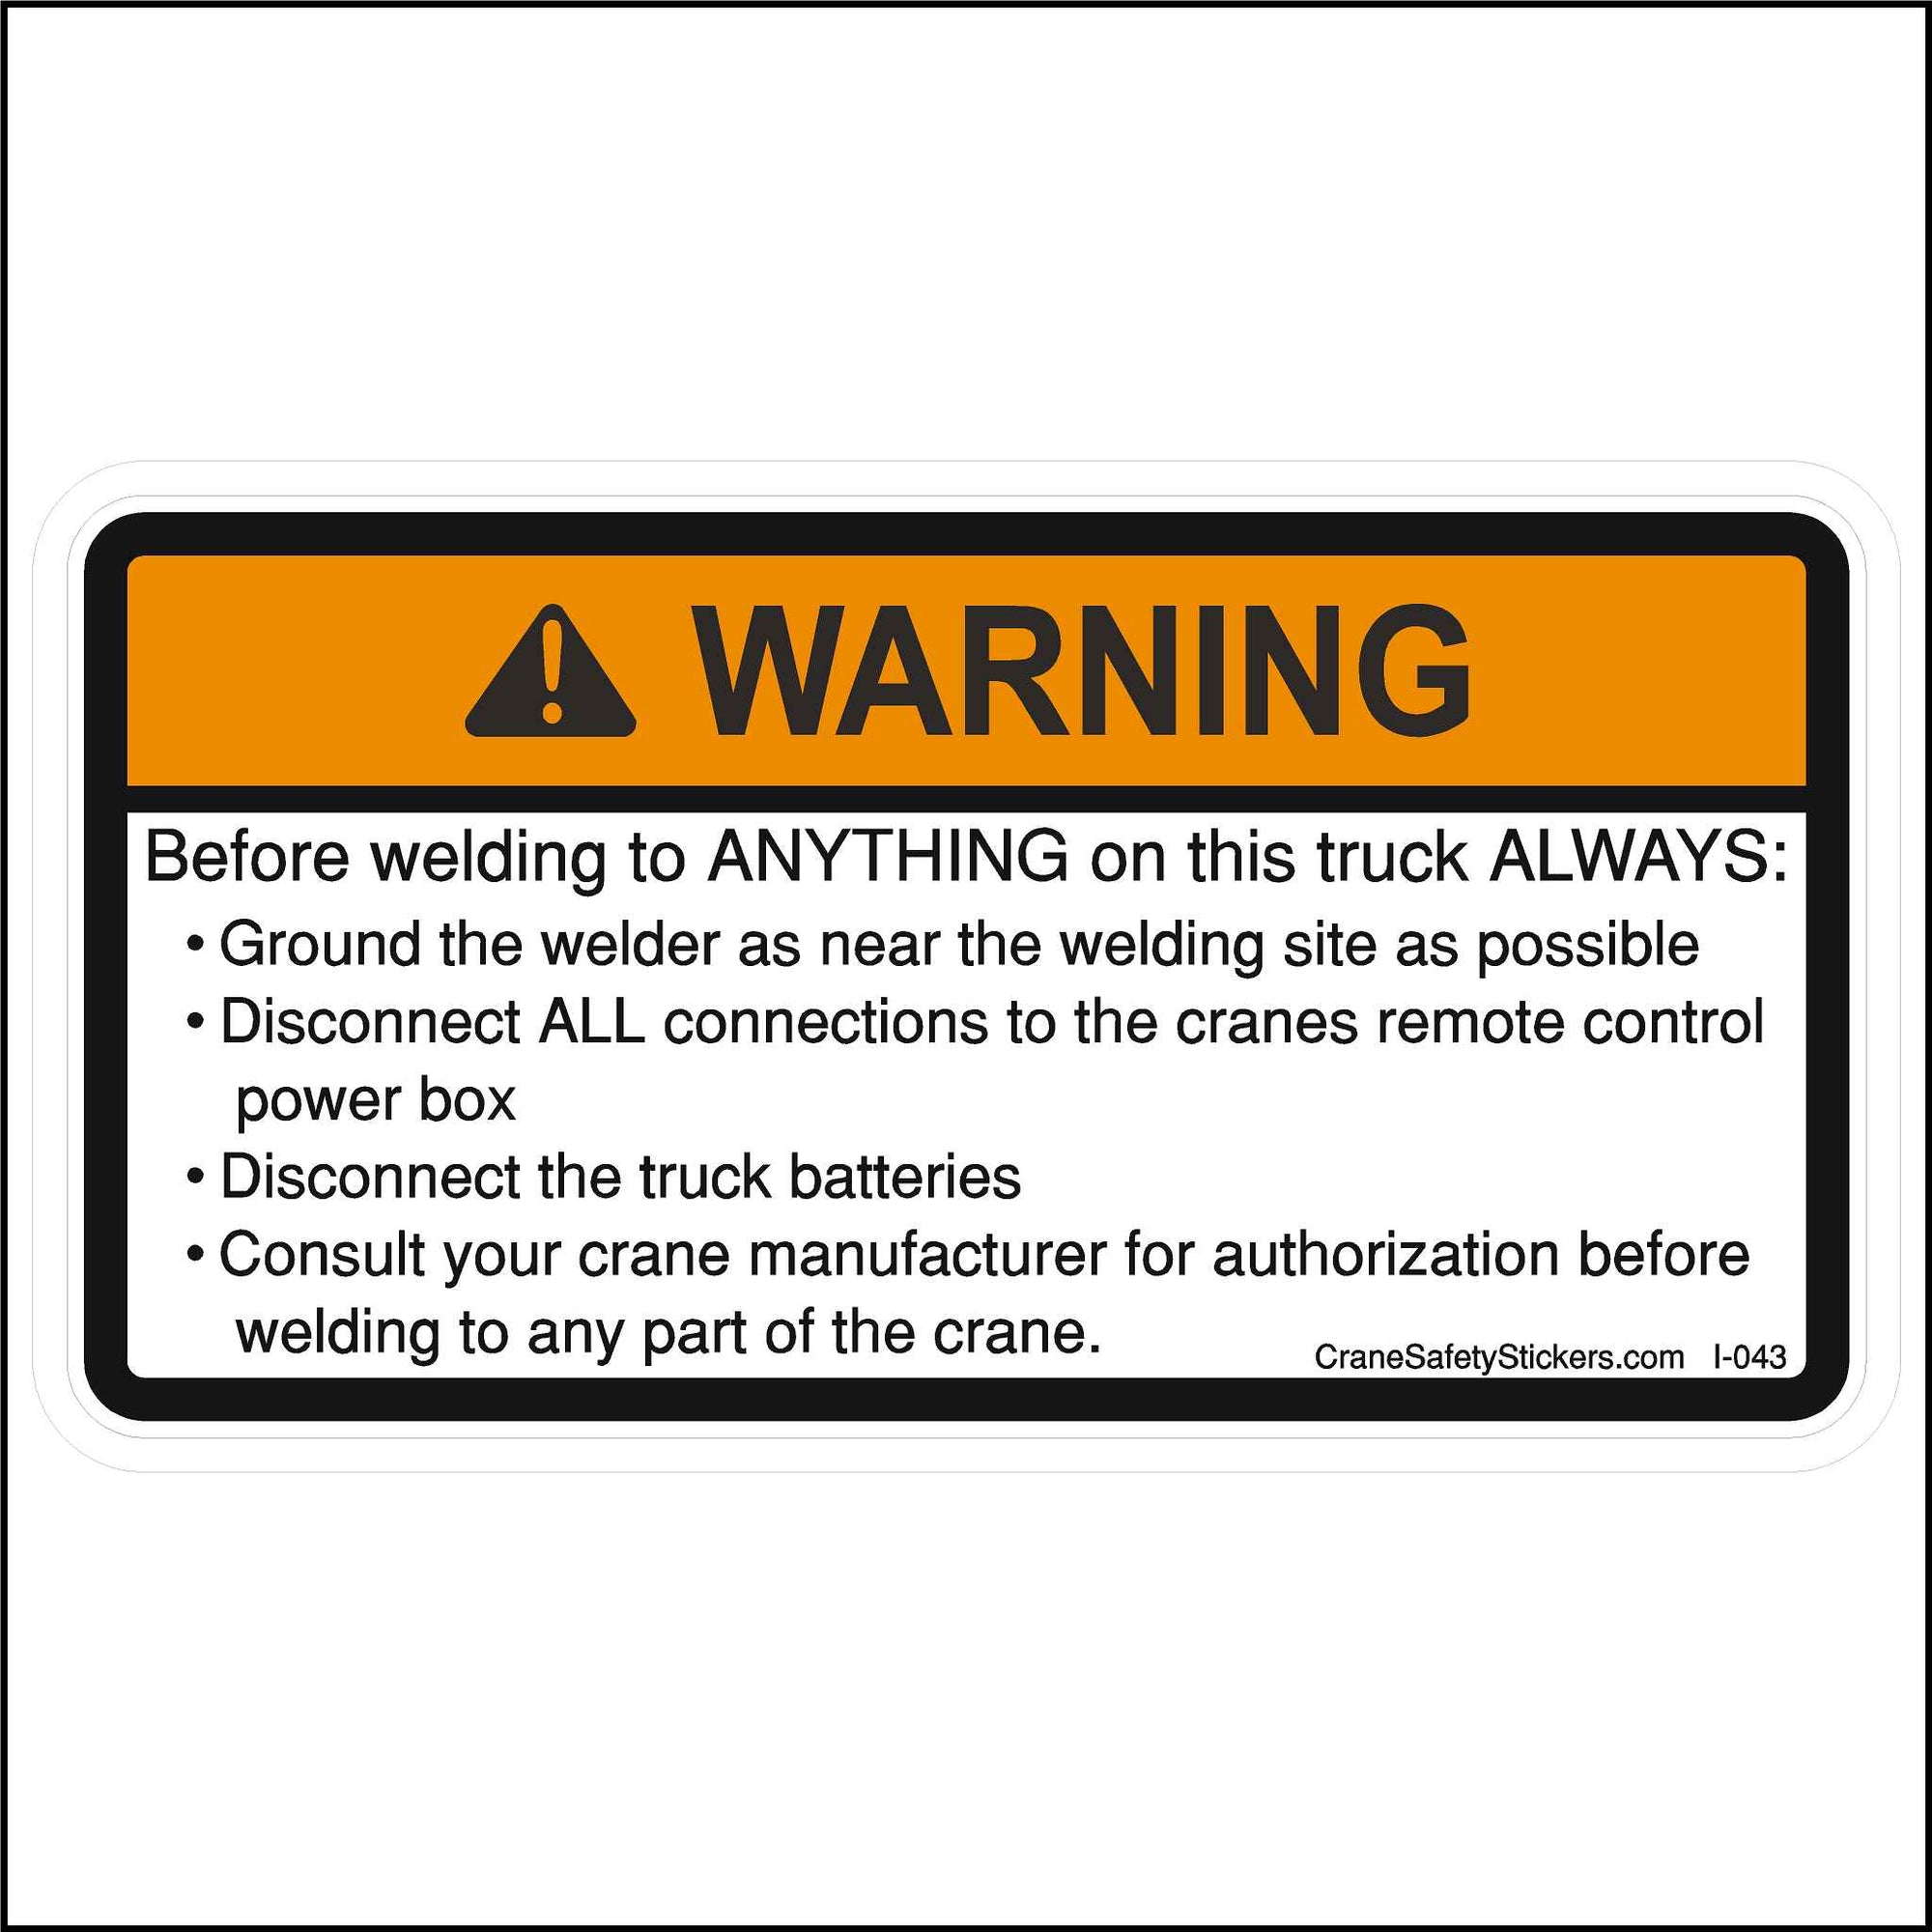 Before Welding Anything To This Truck Sticker is printed with.  Crane Safety Sticker Before Welding Anything To This Truck ALWAYS:  Ground the welder as near the welding site as possible.  Disconnect ALL connections to the crane's remote control power box.  Disconnect all batteries.  Consult your crane manufacturer for authorization before welding to any part of the crane.